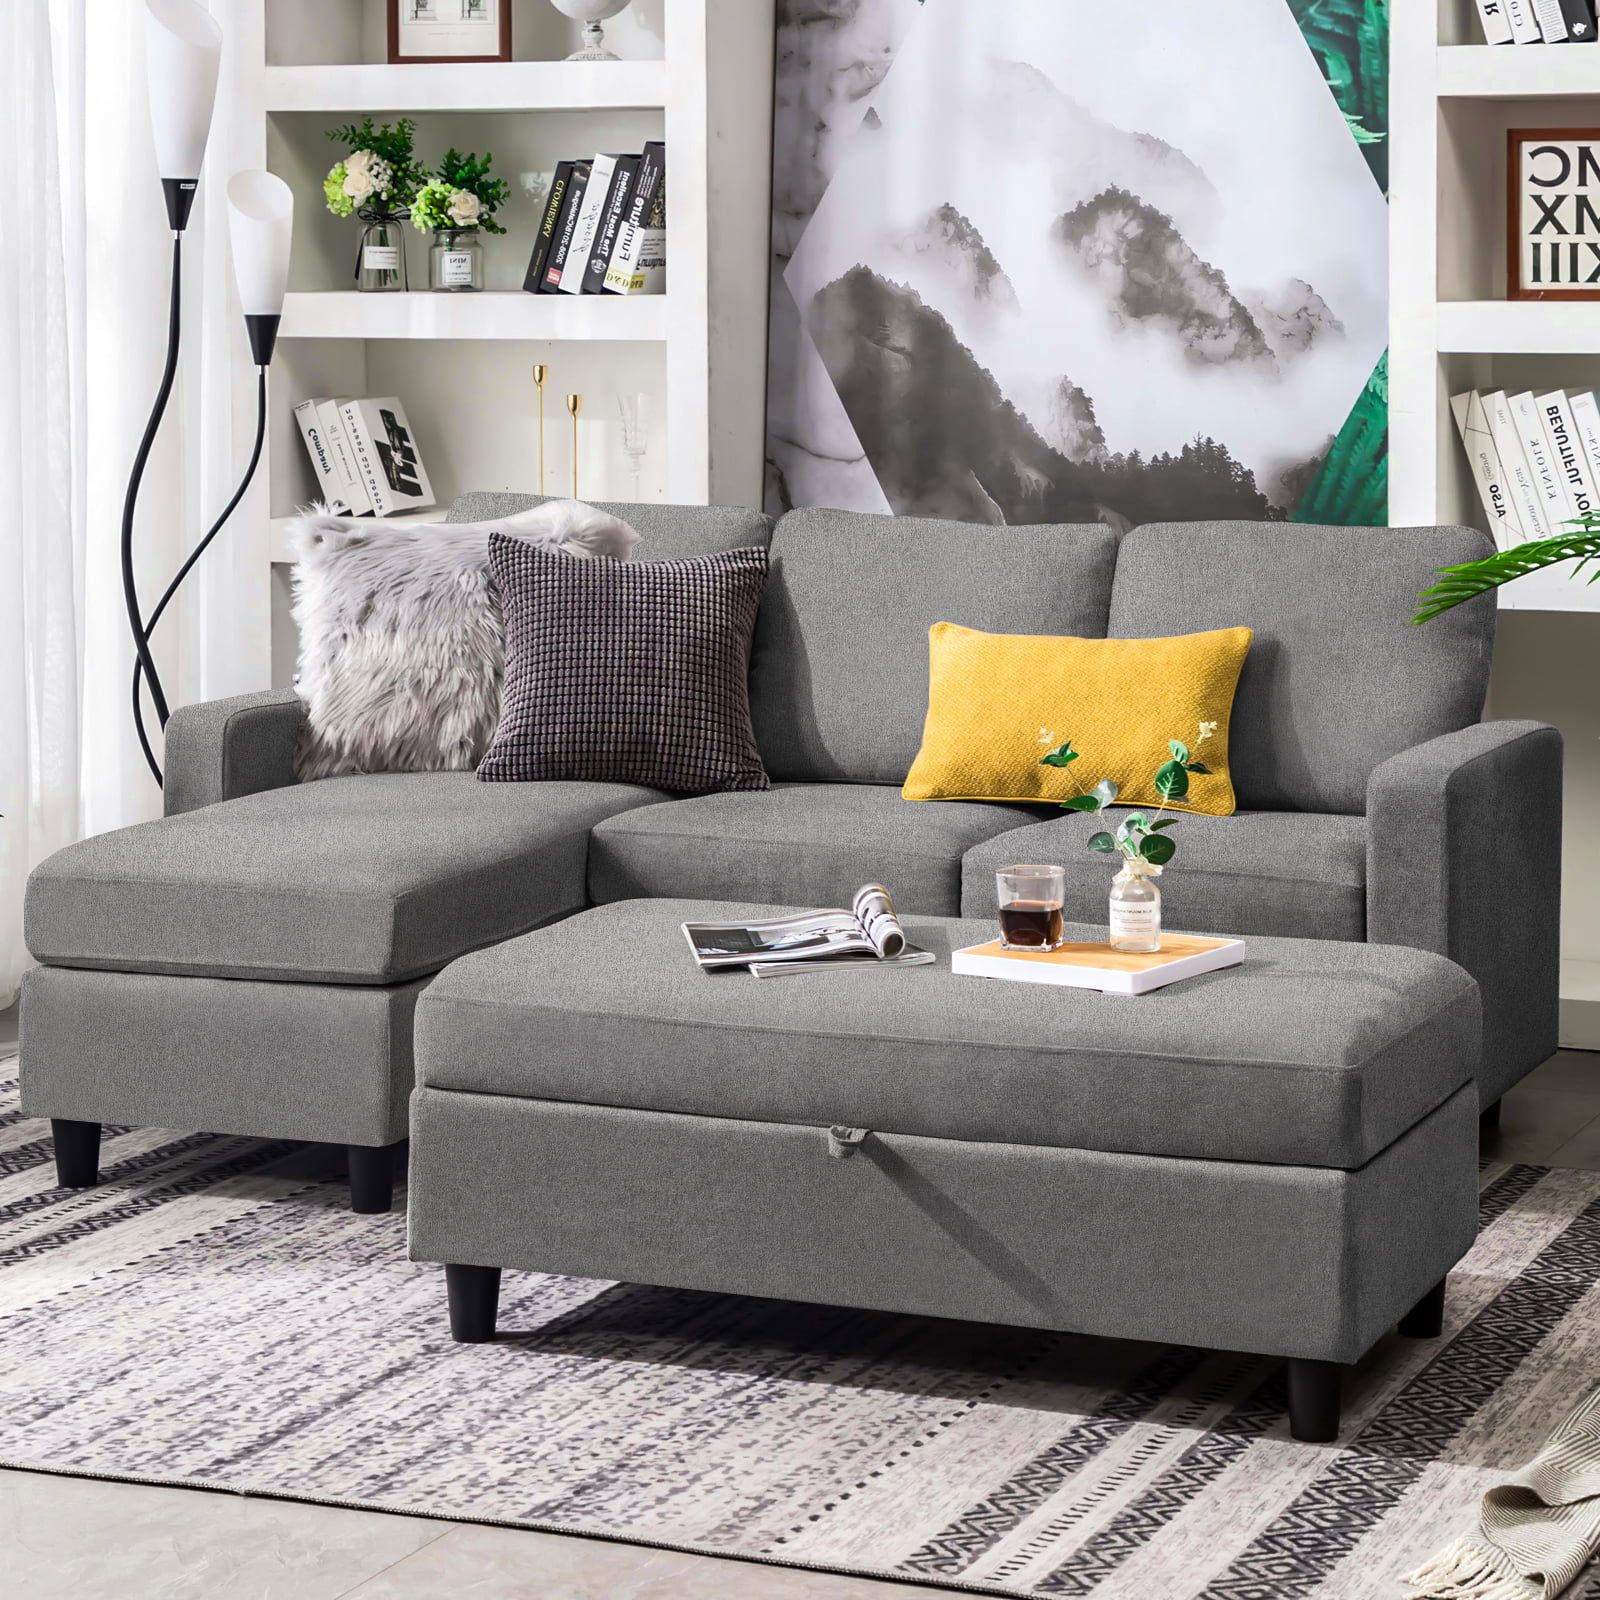 Honbay Convertible Sectional Sofa Set L Shaped Couch With Chaise & Ottoman  For Small Spaces, Grey Polyester – Walmart Pertaining To Small L Shaped Sectionals (Gallery 7 of 20)